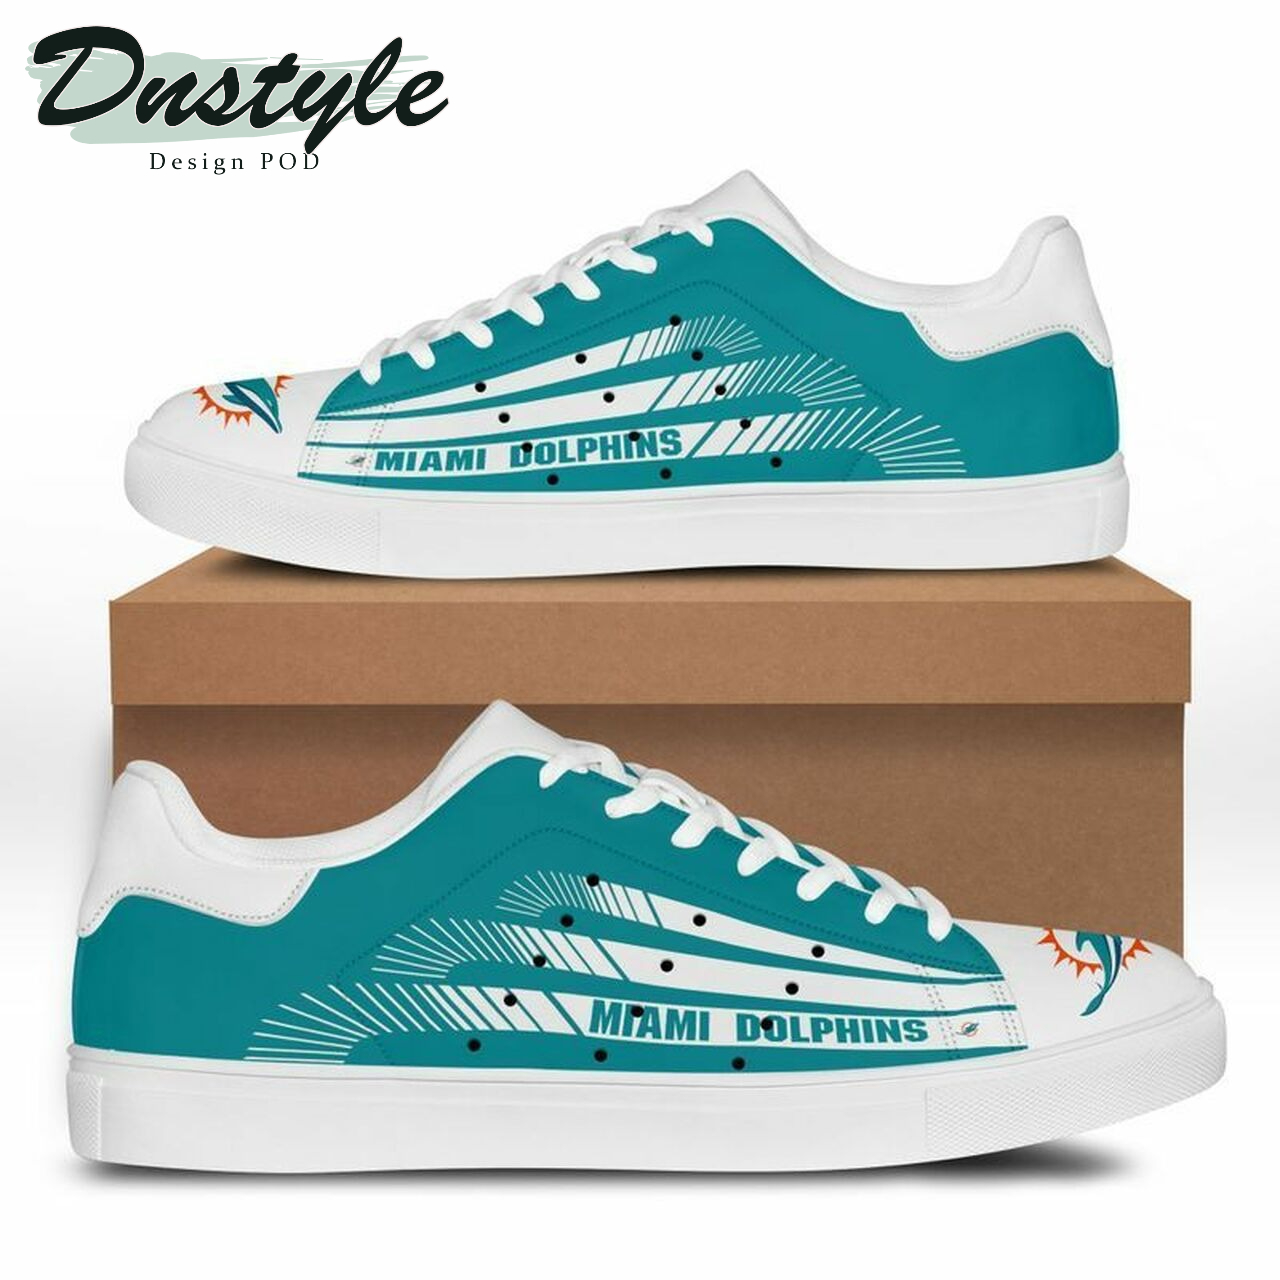 NFL miami dolphins stan smith low top skate shoes